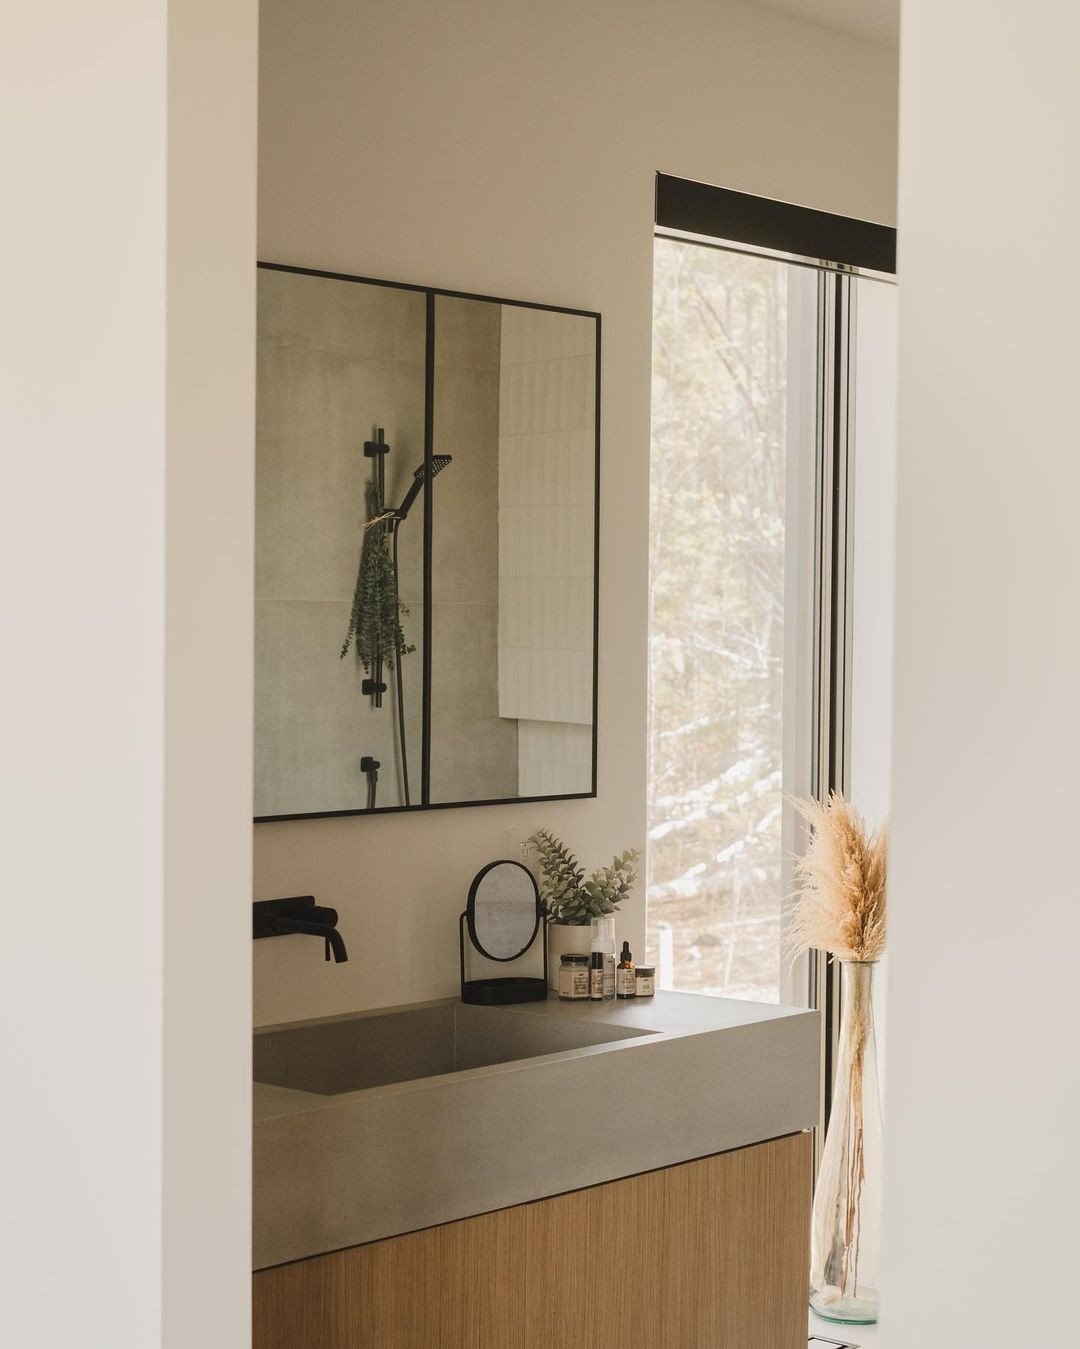 This bathroom exudes serenity with its neutral tones and black finishes.⁠
⁠
Looking to add a natural element to your bathroom project? Add a concrete sink for the perfect blend of natural and contemporary.⁠
⁠
Inquire today about our selection of conc